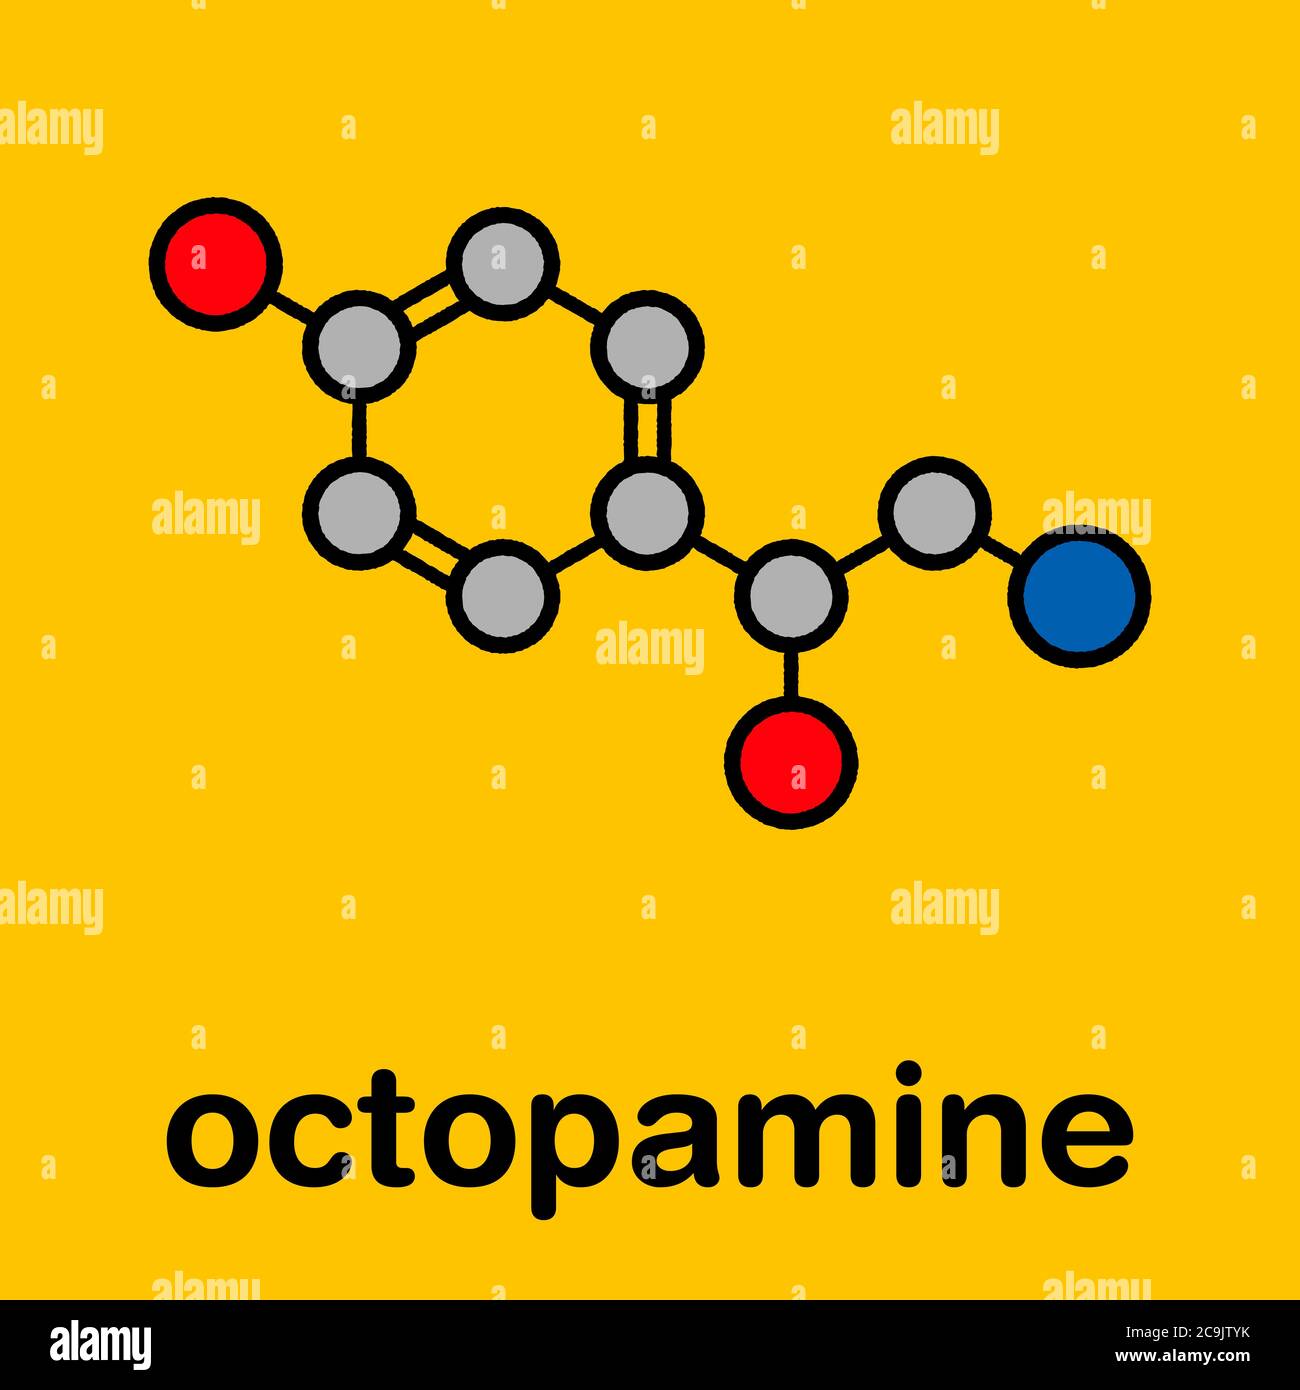 Octopamine stimulant drug molecule (sympathomimetic agent). Stylized skeletal formula (chemical structure). Atoms are shown as color-coded circles wit Stock Photo